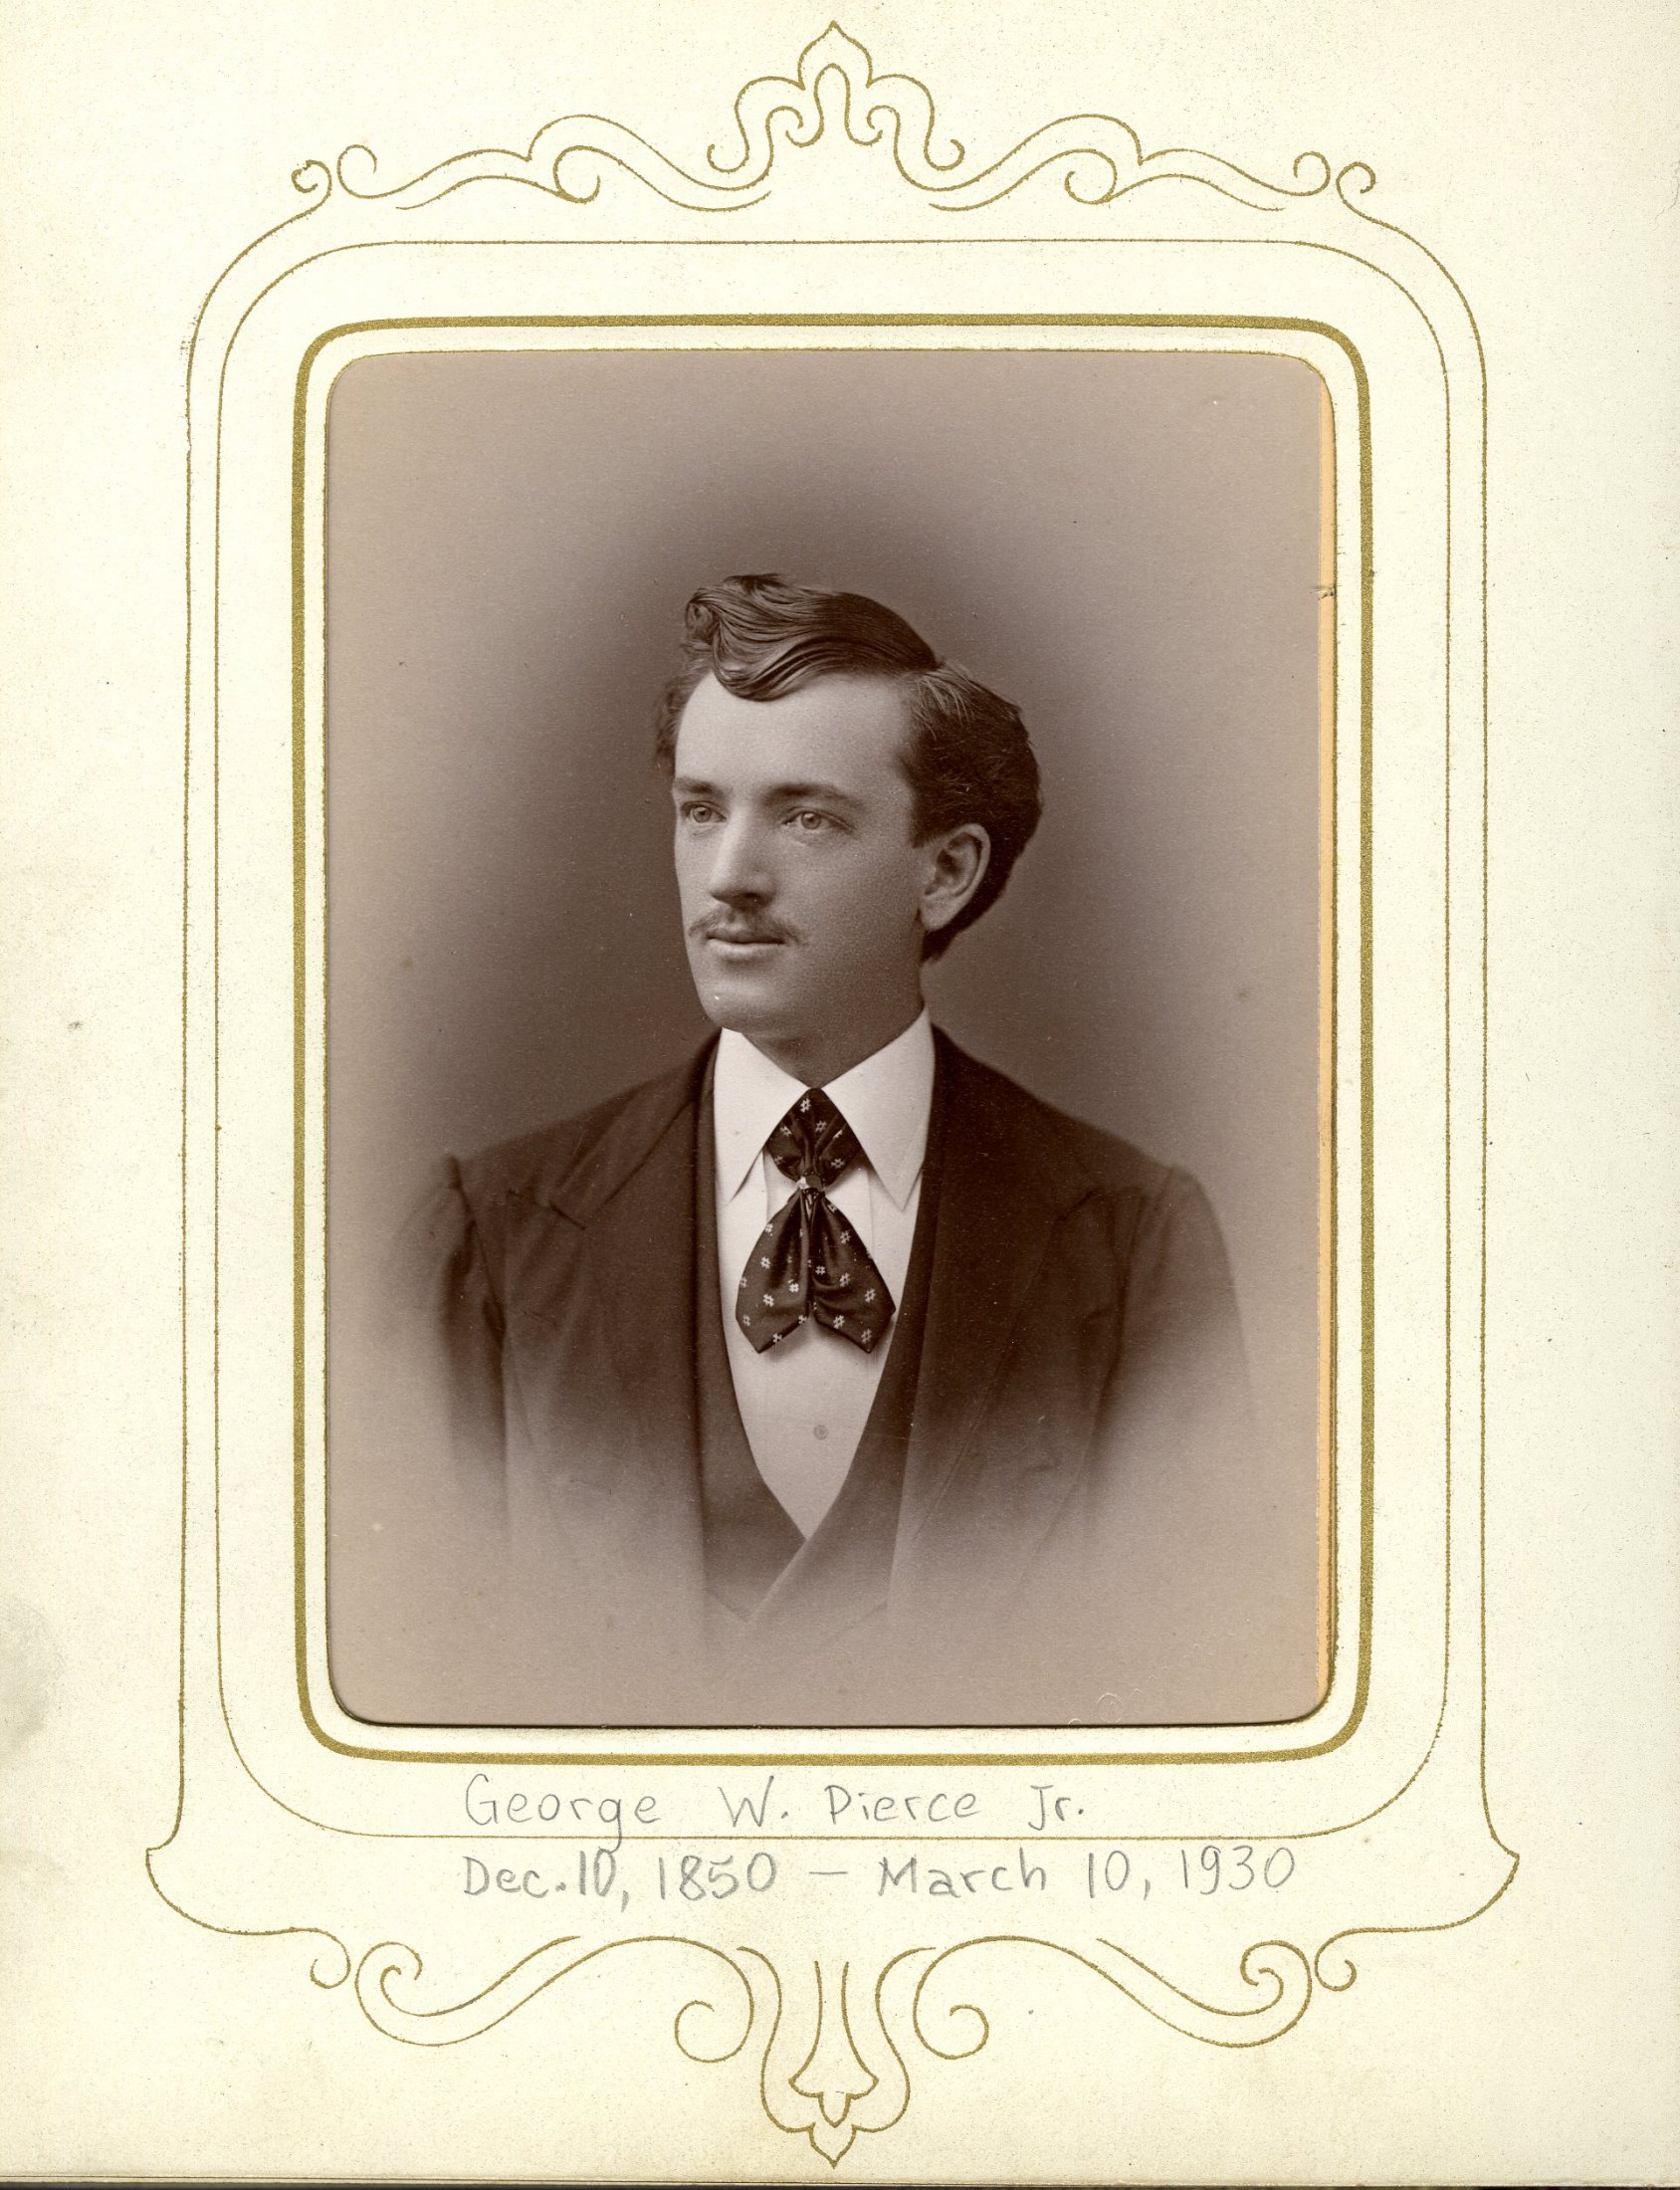 Photo of George W. Pierce Jr., 1875. Pierce Family Papers, Special Collections, University of California, Davis Library.